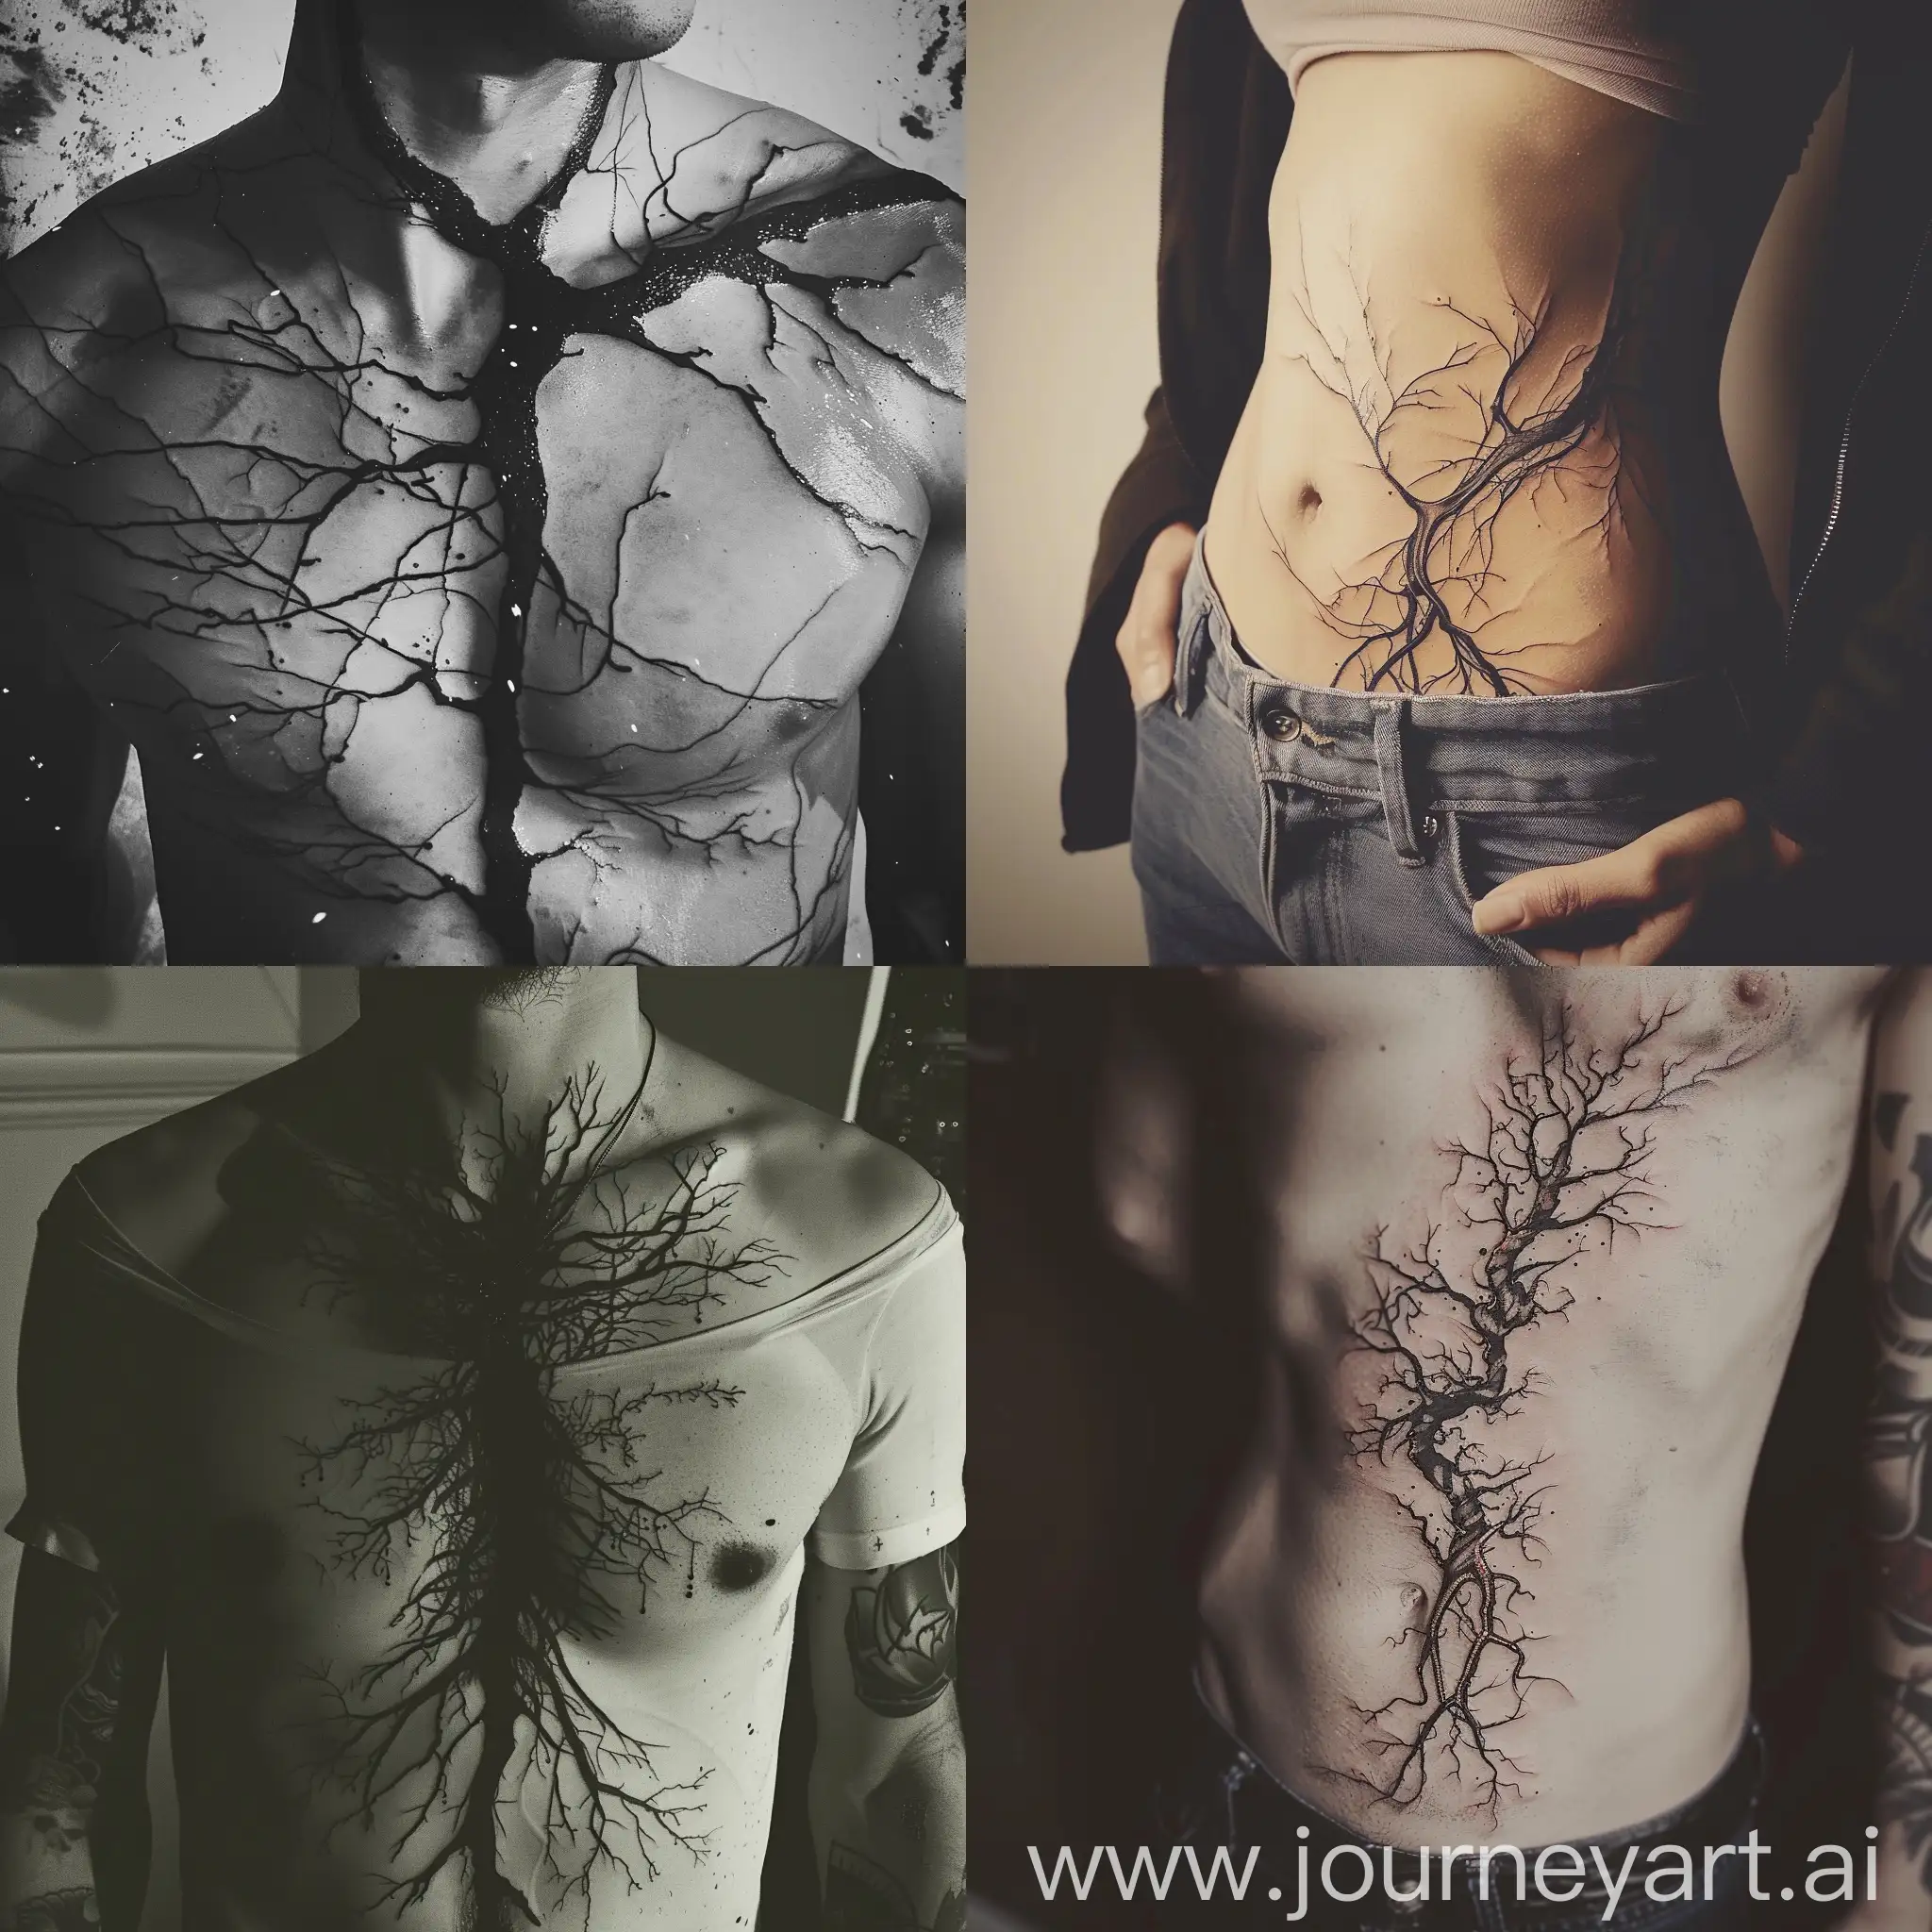 I want a tattoo design from the neck to below the navel. I want it to look like a vein. I want it to be minimal but busy. I want to show my dark personality. I want to show my pained personality. I want to show my calm personality. I want to show my emotionless personality.